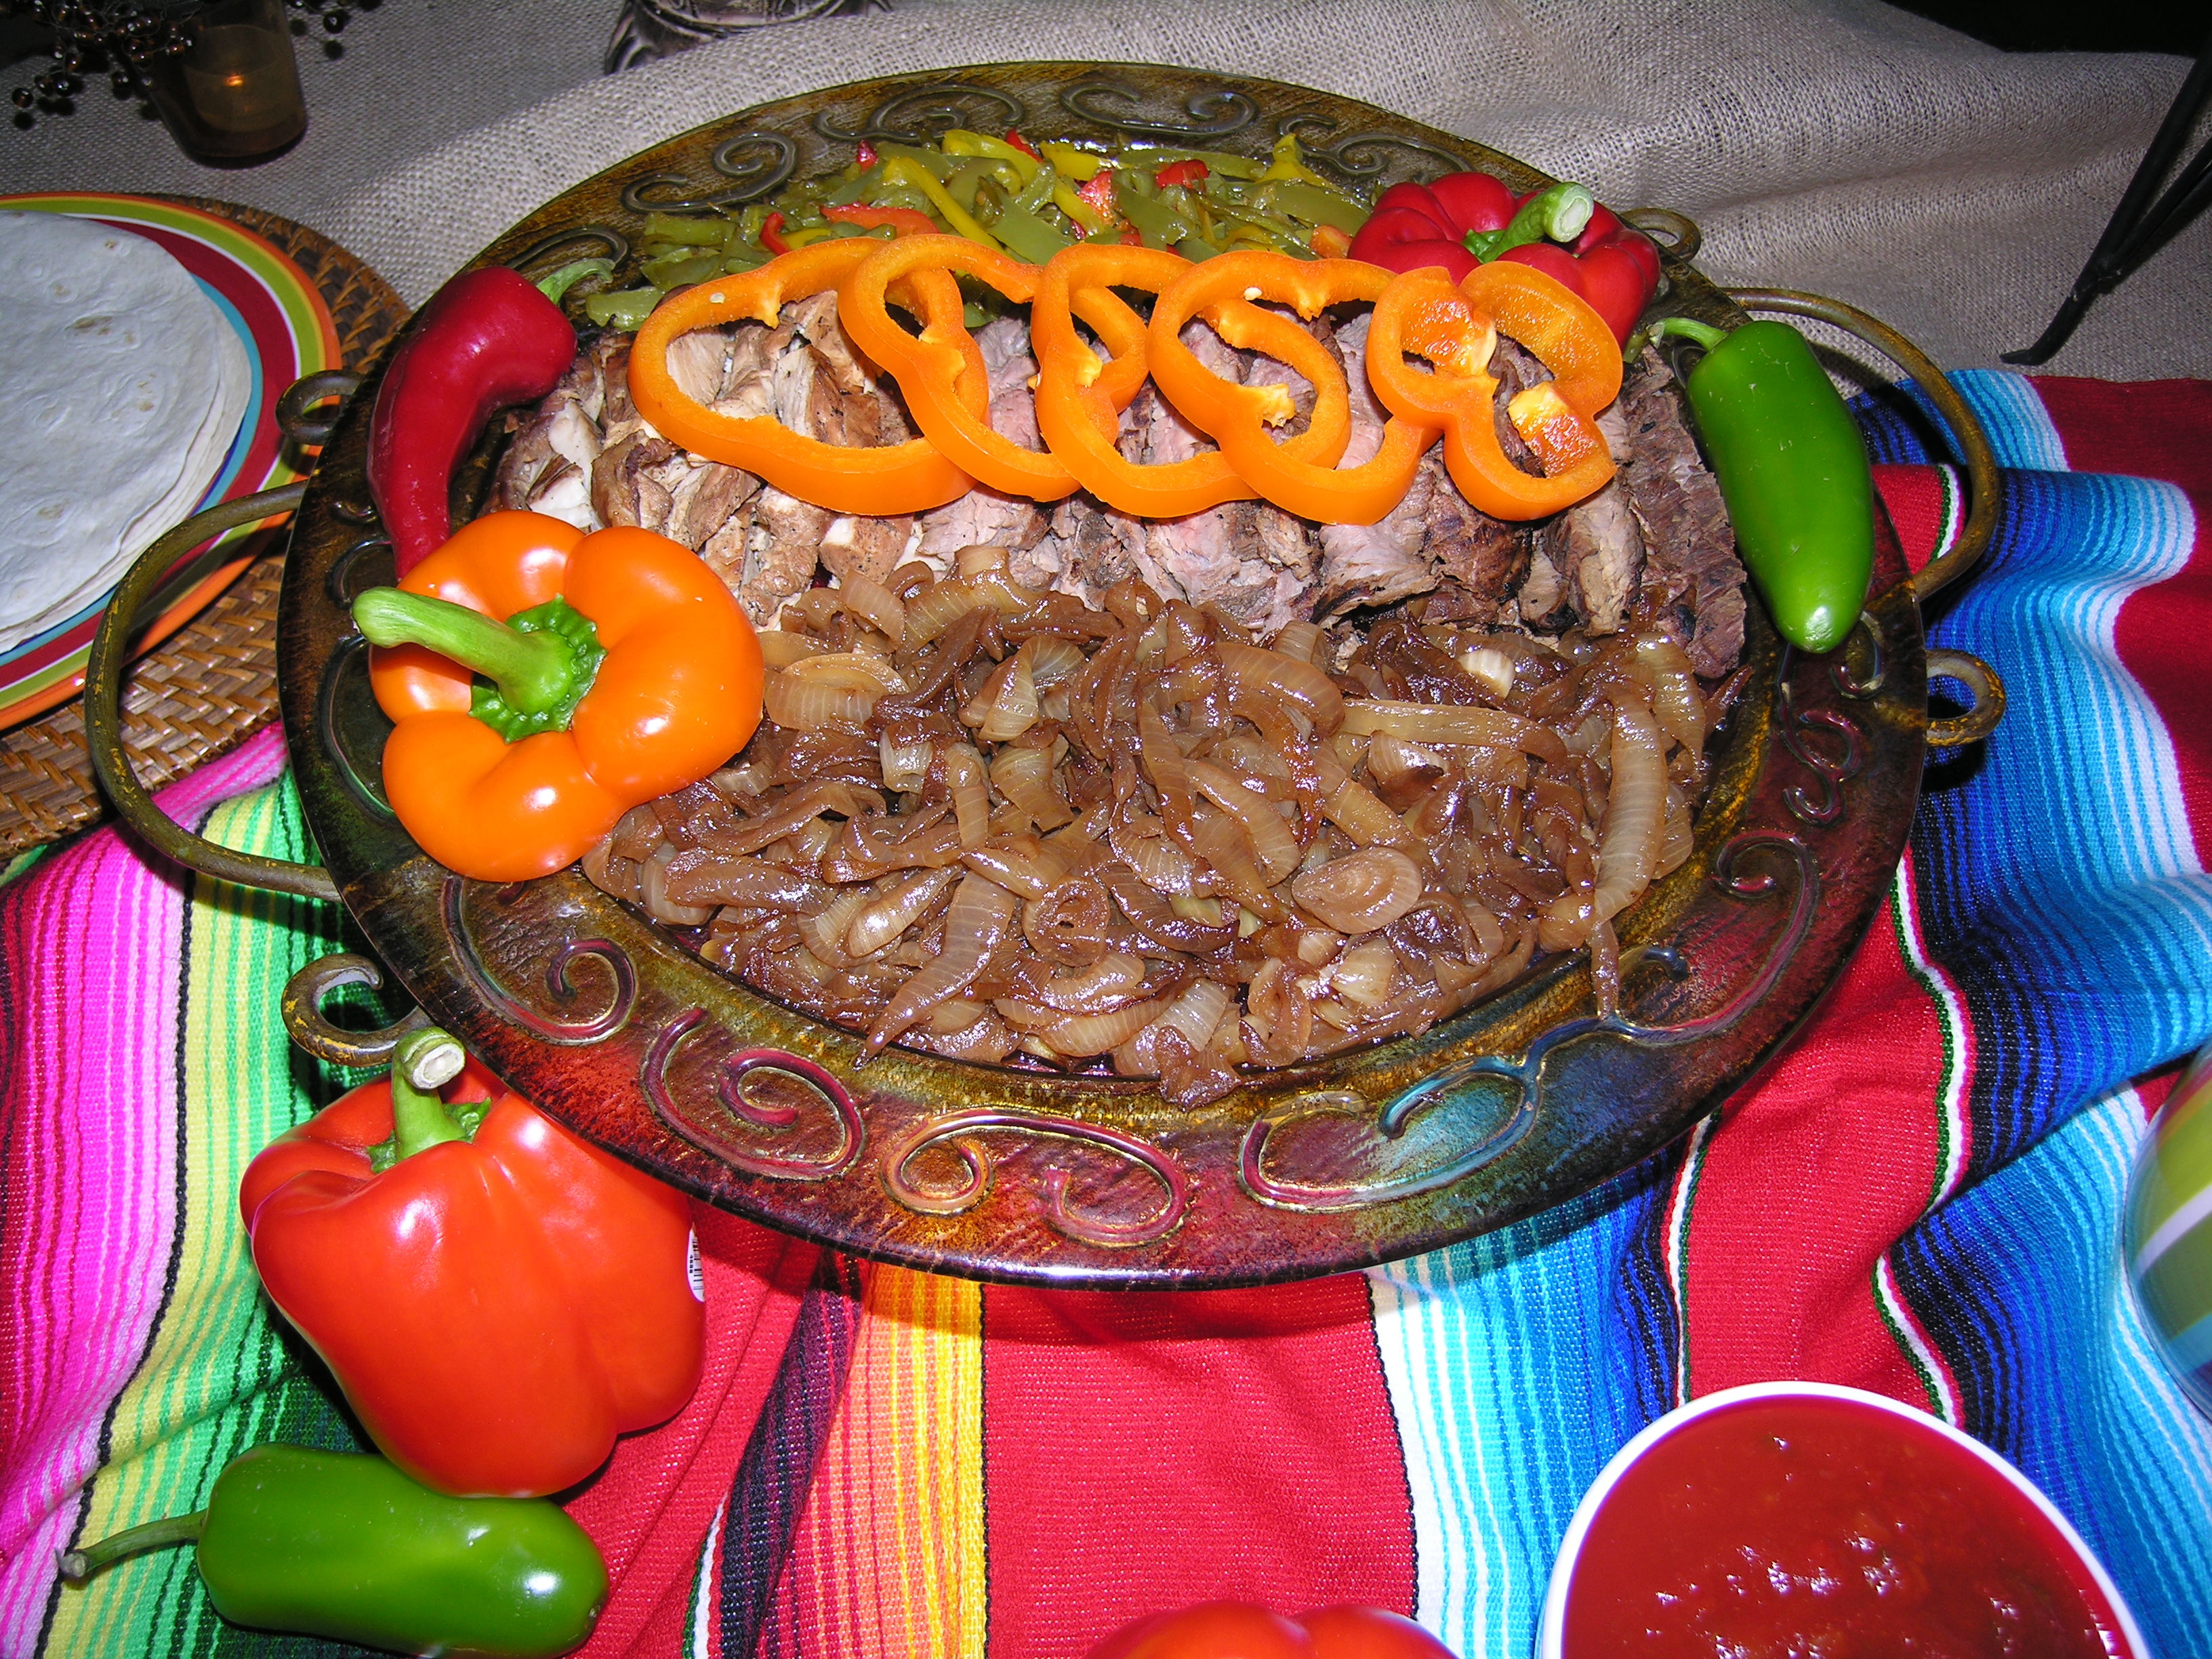 Prepare Mexican inspired dishes for celebrating Cinco de Mayo